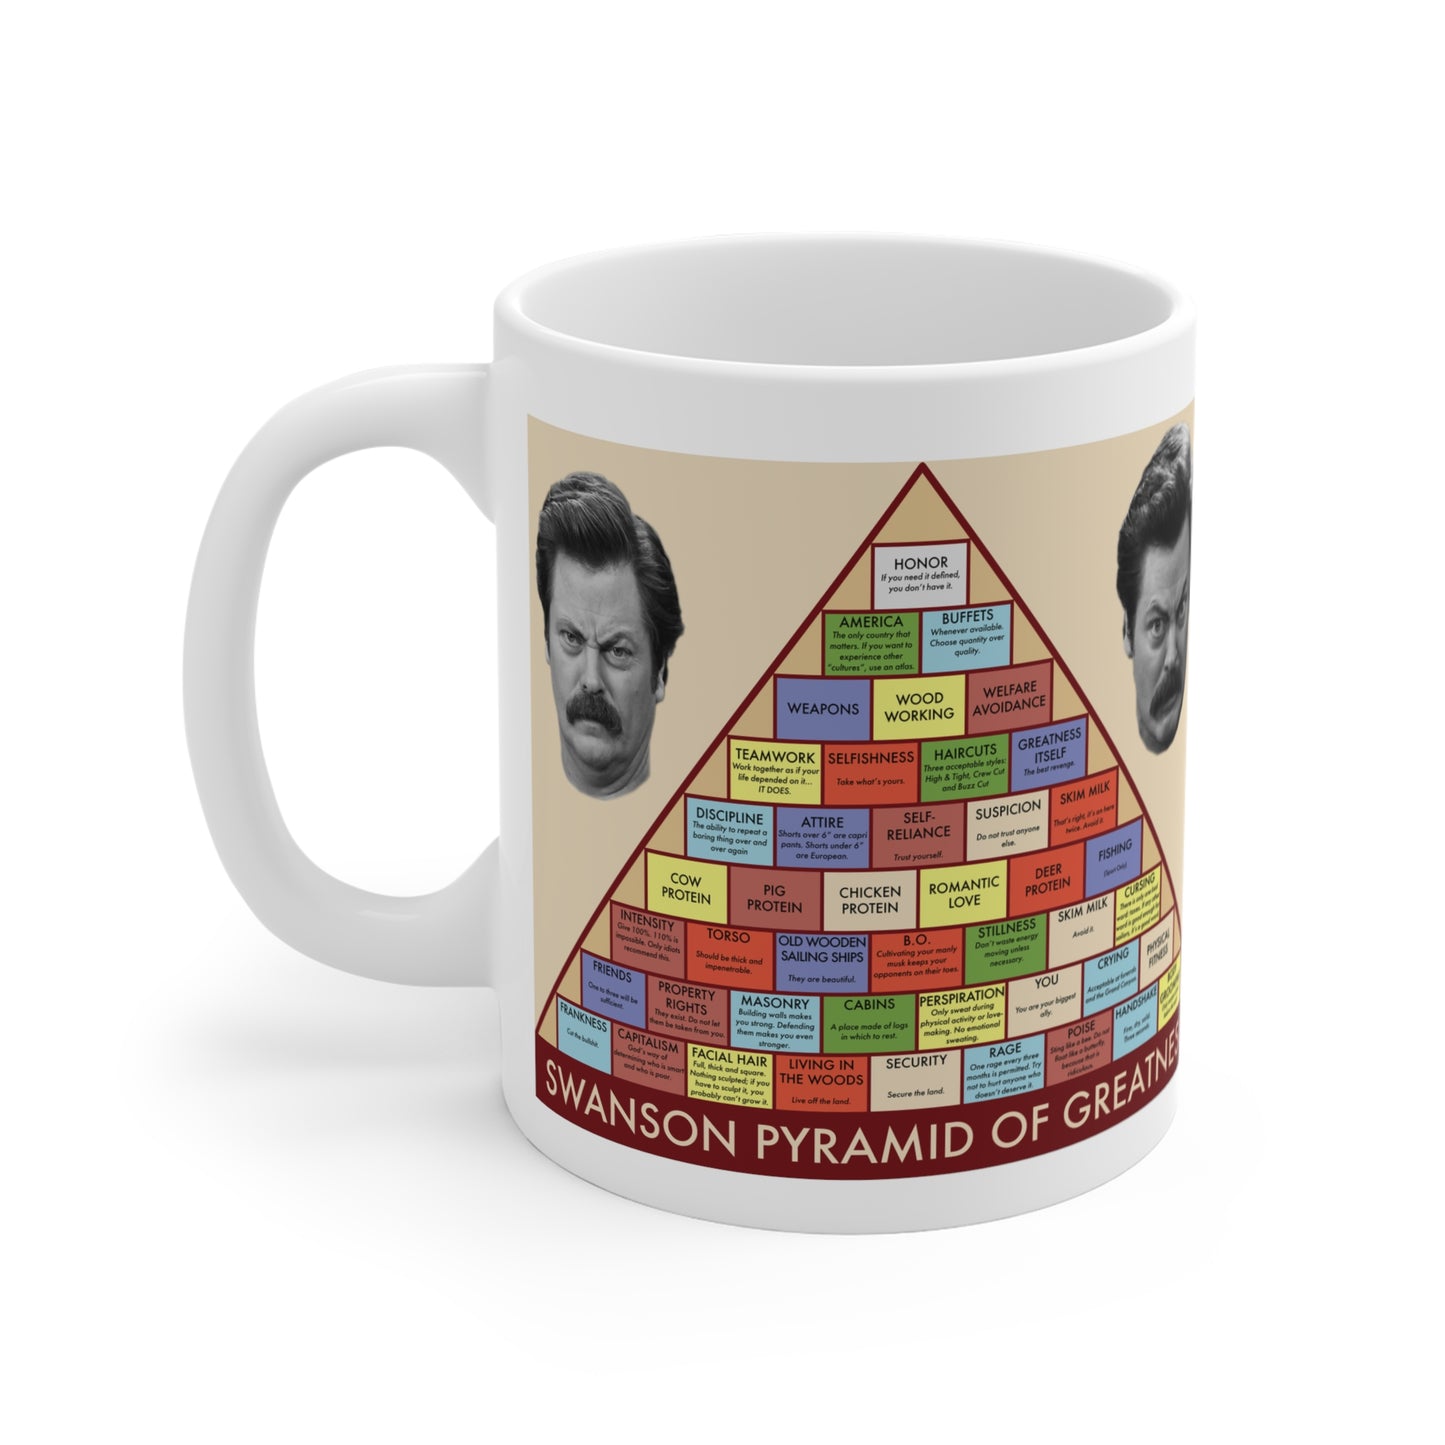 Ron Swanson Pyramid of Greatness mug (11 oz) - Parks and Recreation show fan gift